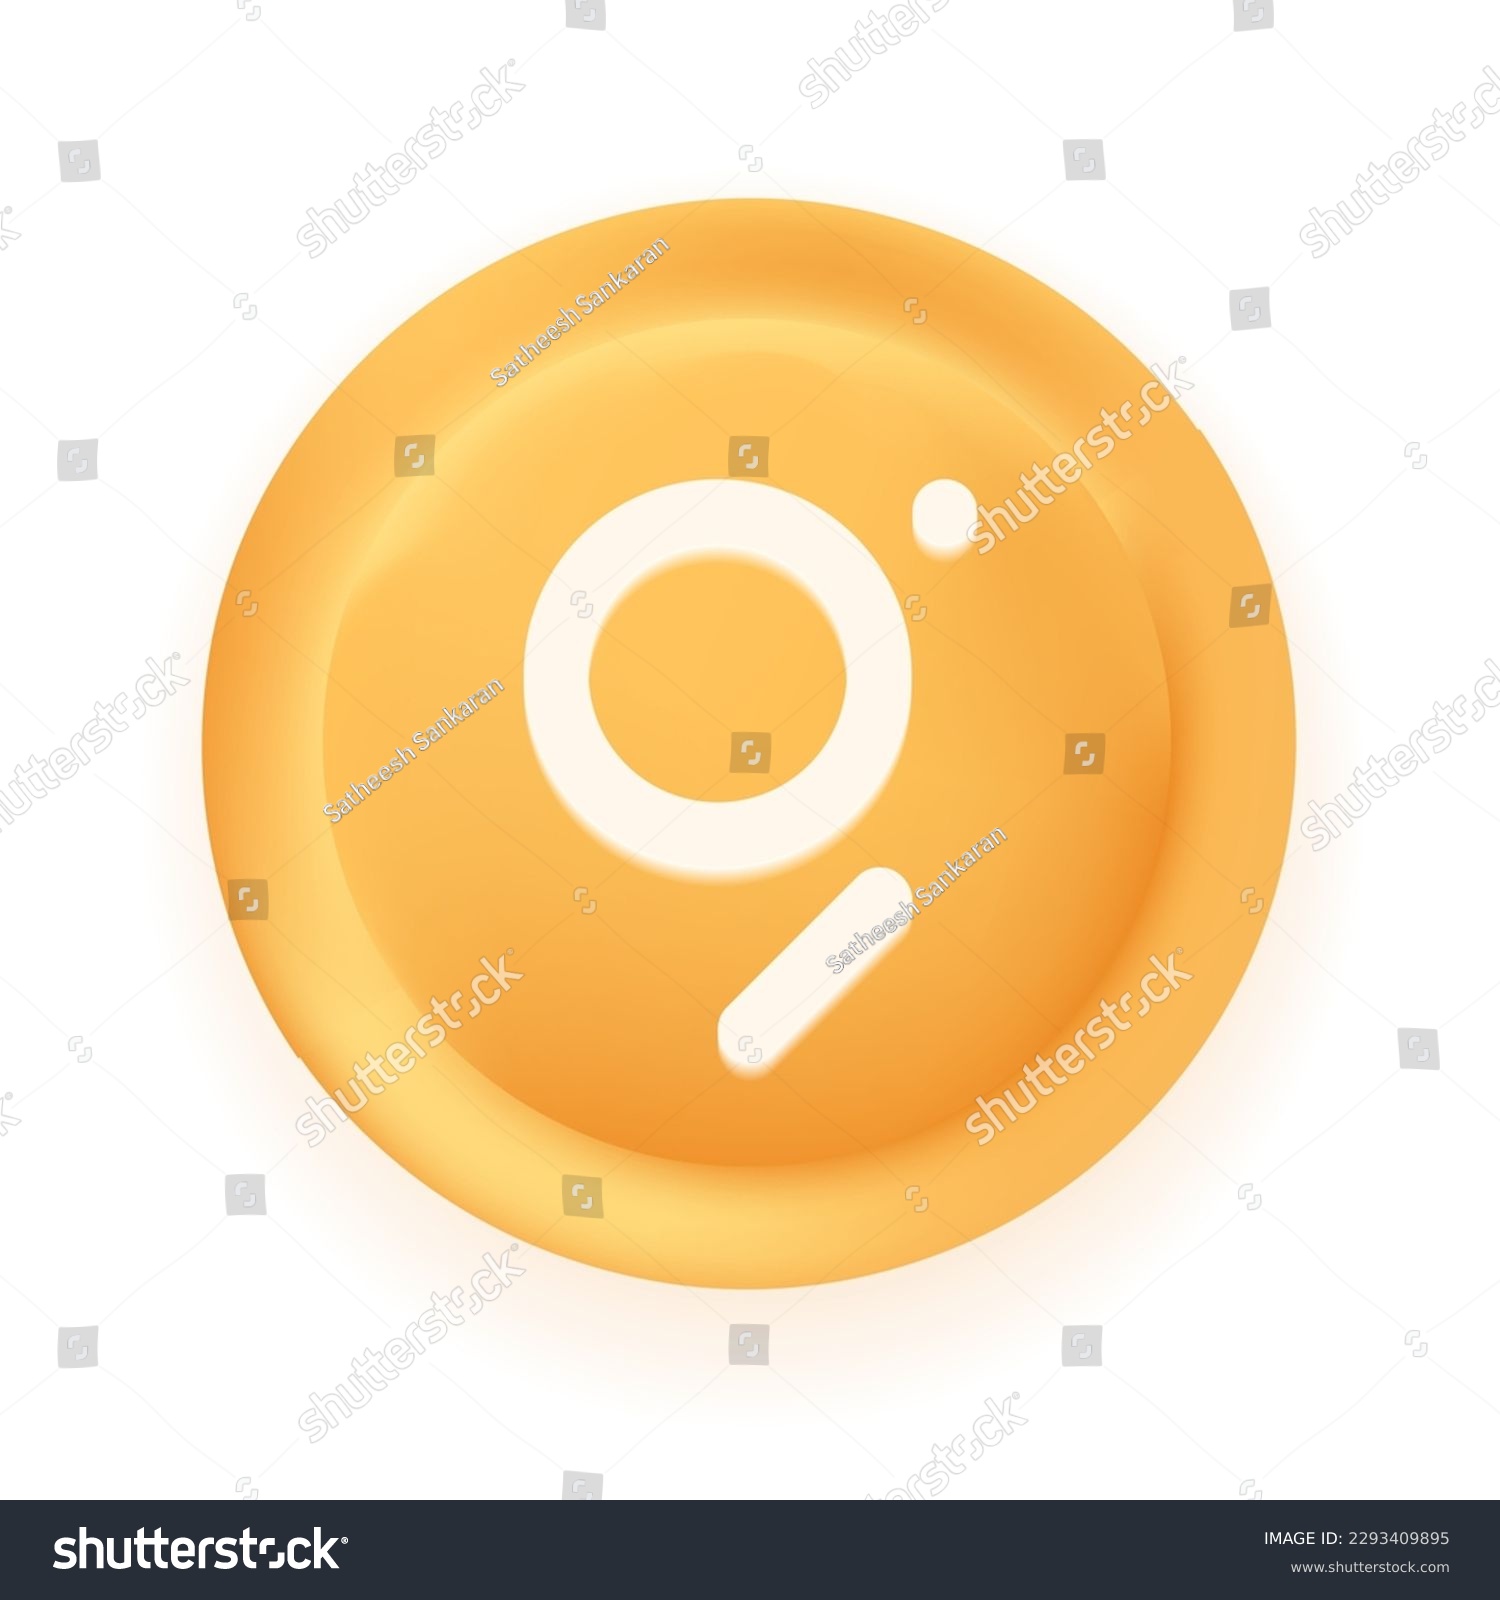 SVG of The Graph (GRT) crypto currency 3D coin vector illustration isolated on white background. Can be used as virtual money icon, logo, emblem, sticker and badge designs. svg